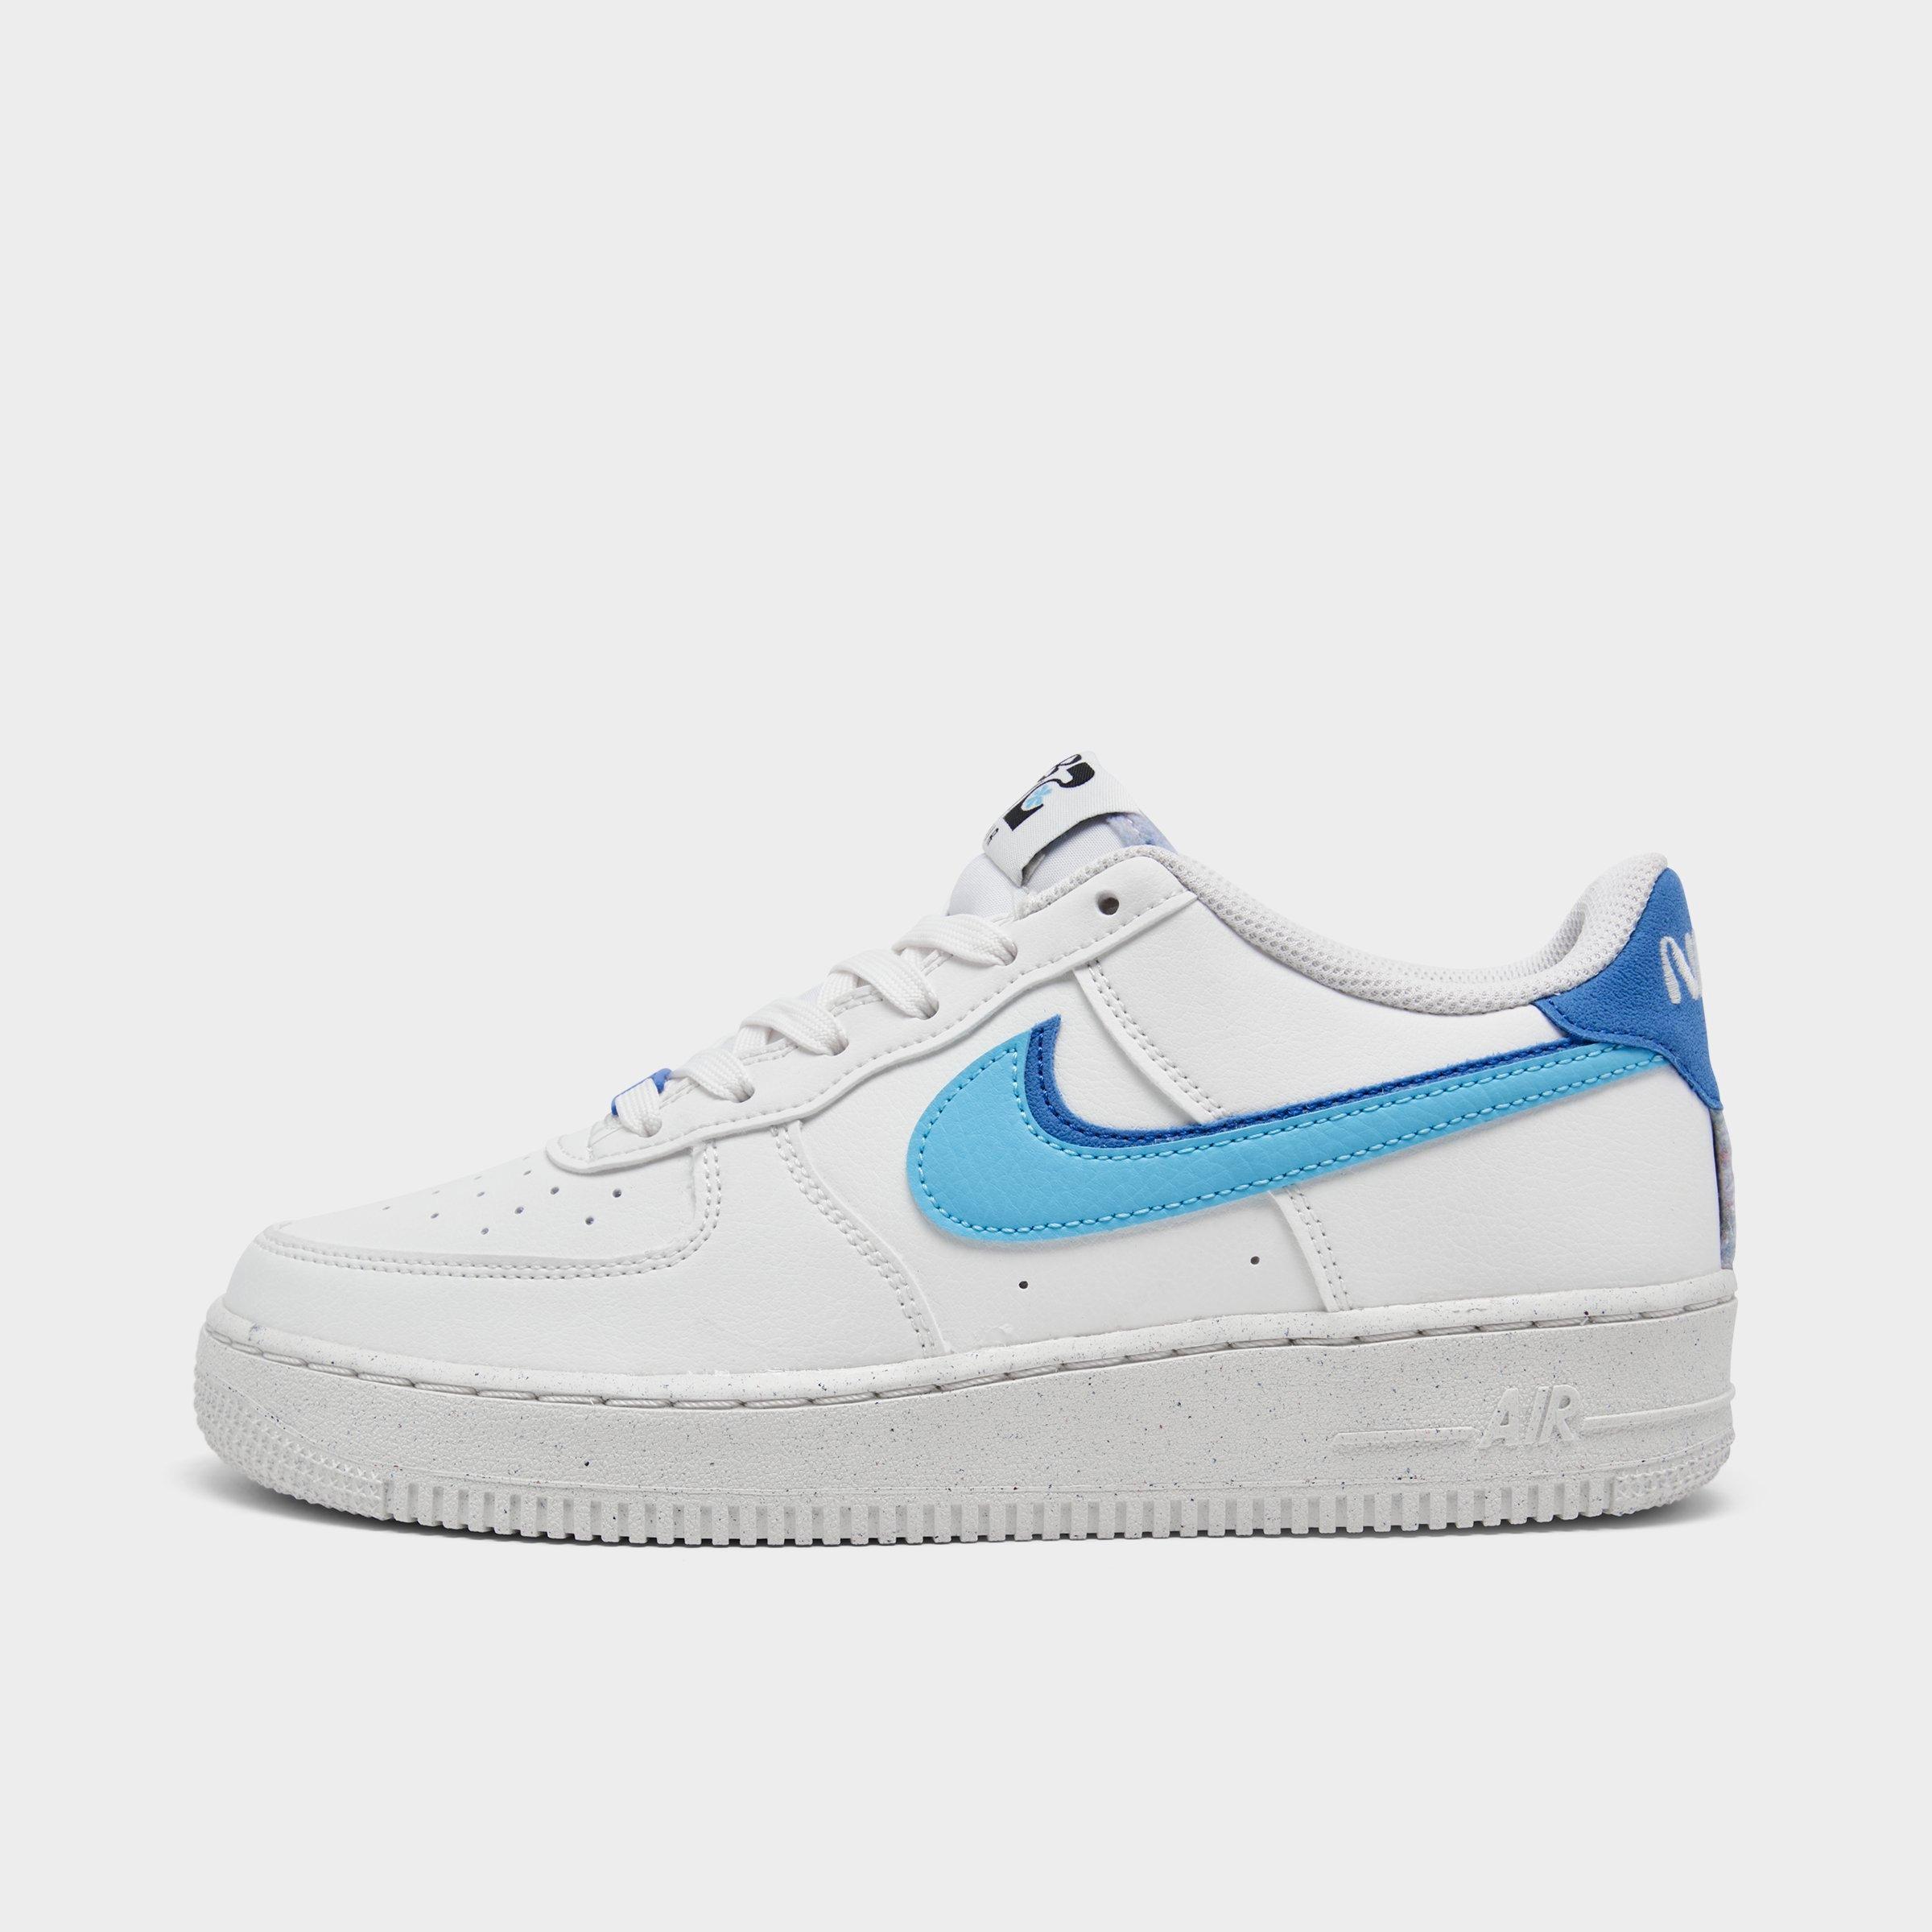 view more detail nike air force 1 lv8